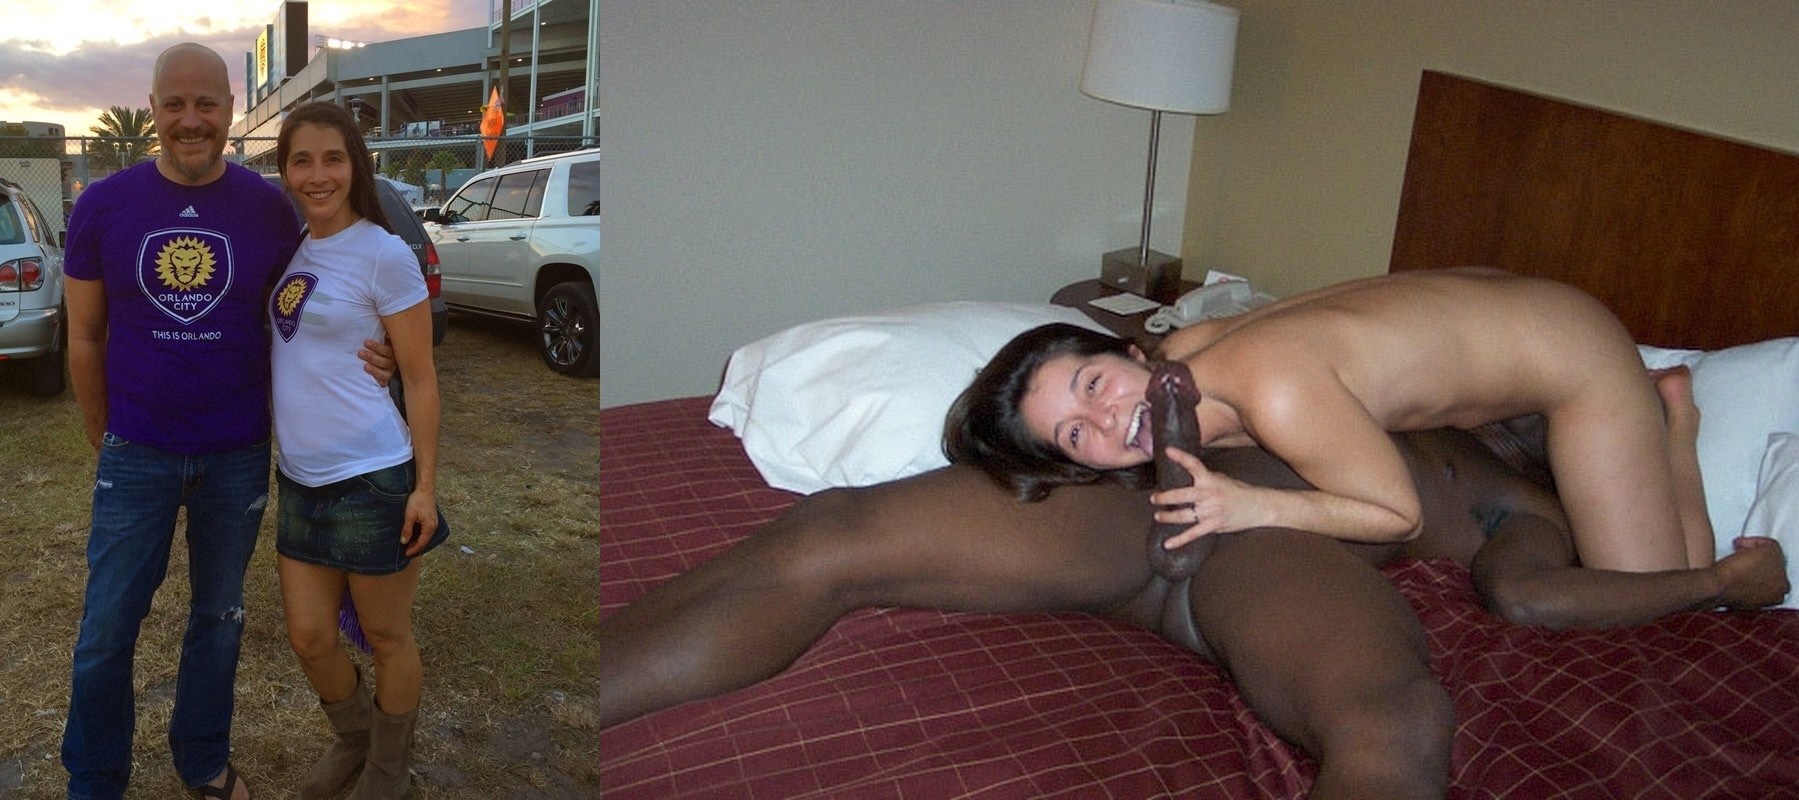 Archive of the Wife and Her Fuck on a Business Trip (67 photos) pic